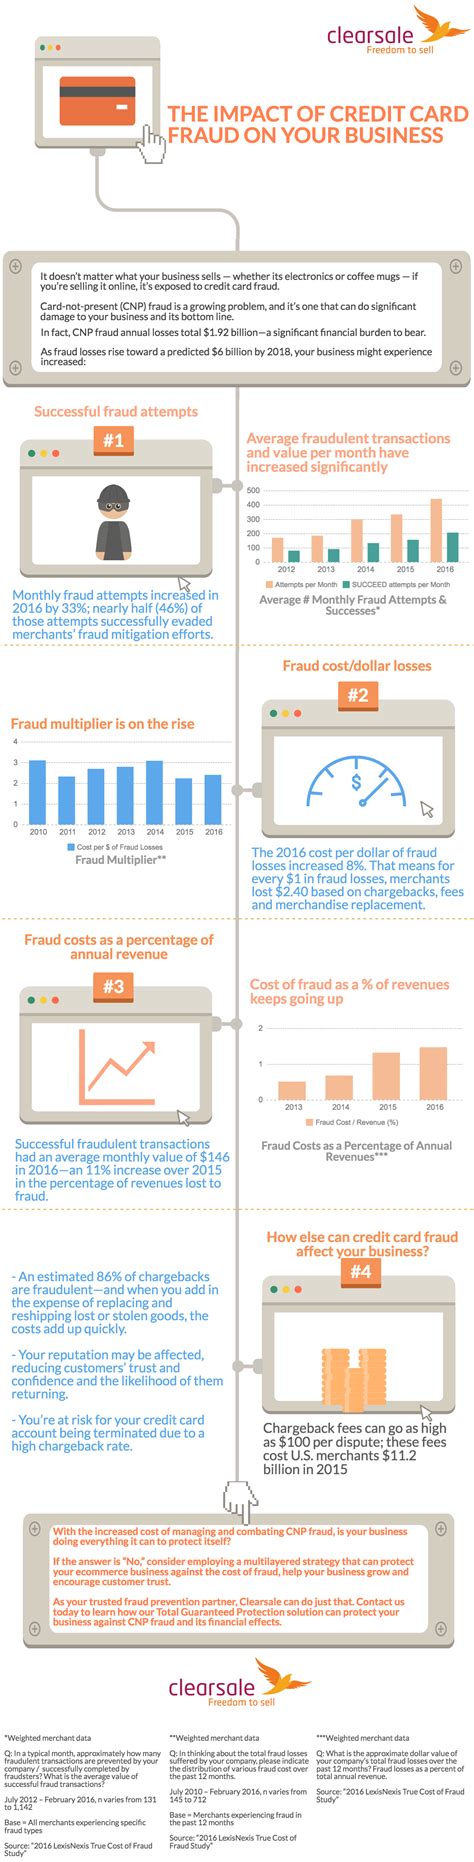 Don't trust a site just because it claims to be secure. The impact of credit card fraud on your business